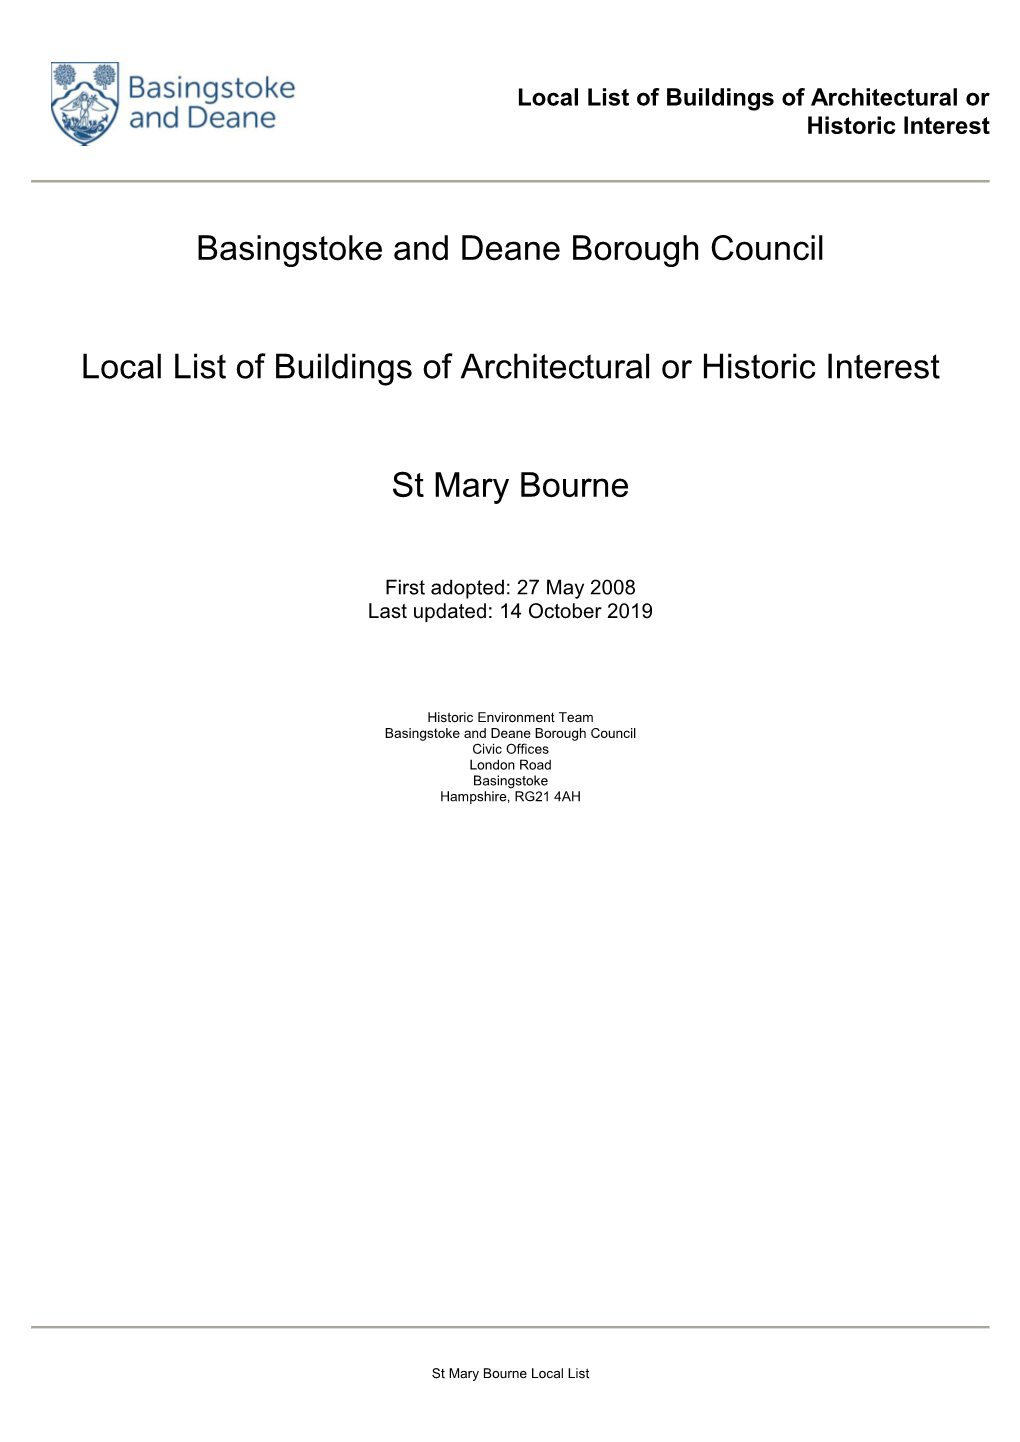 St Mary Bourne Local List